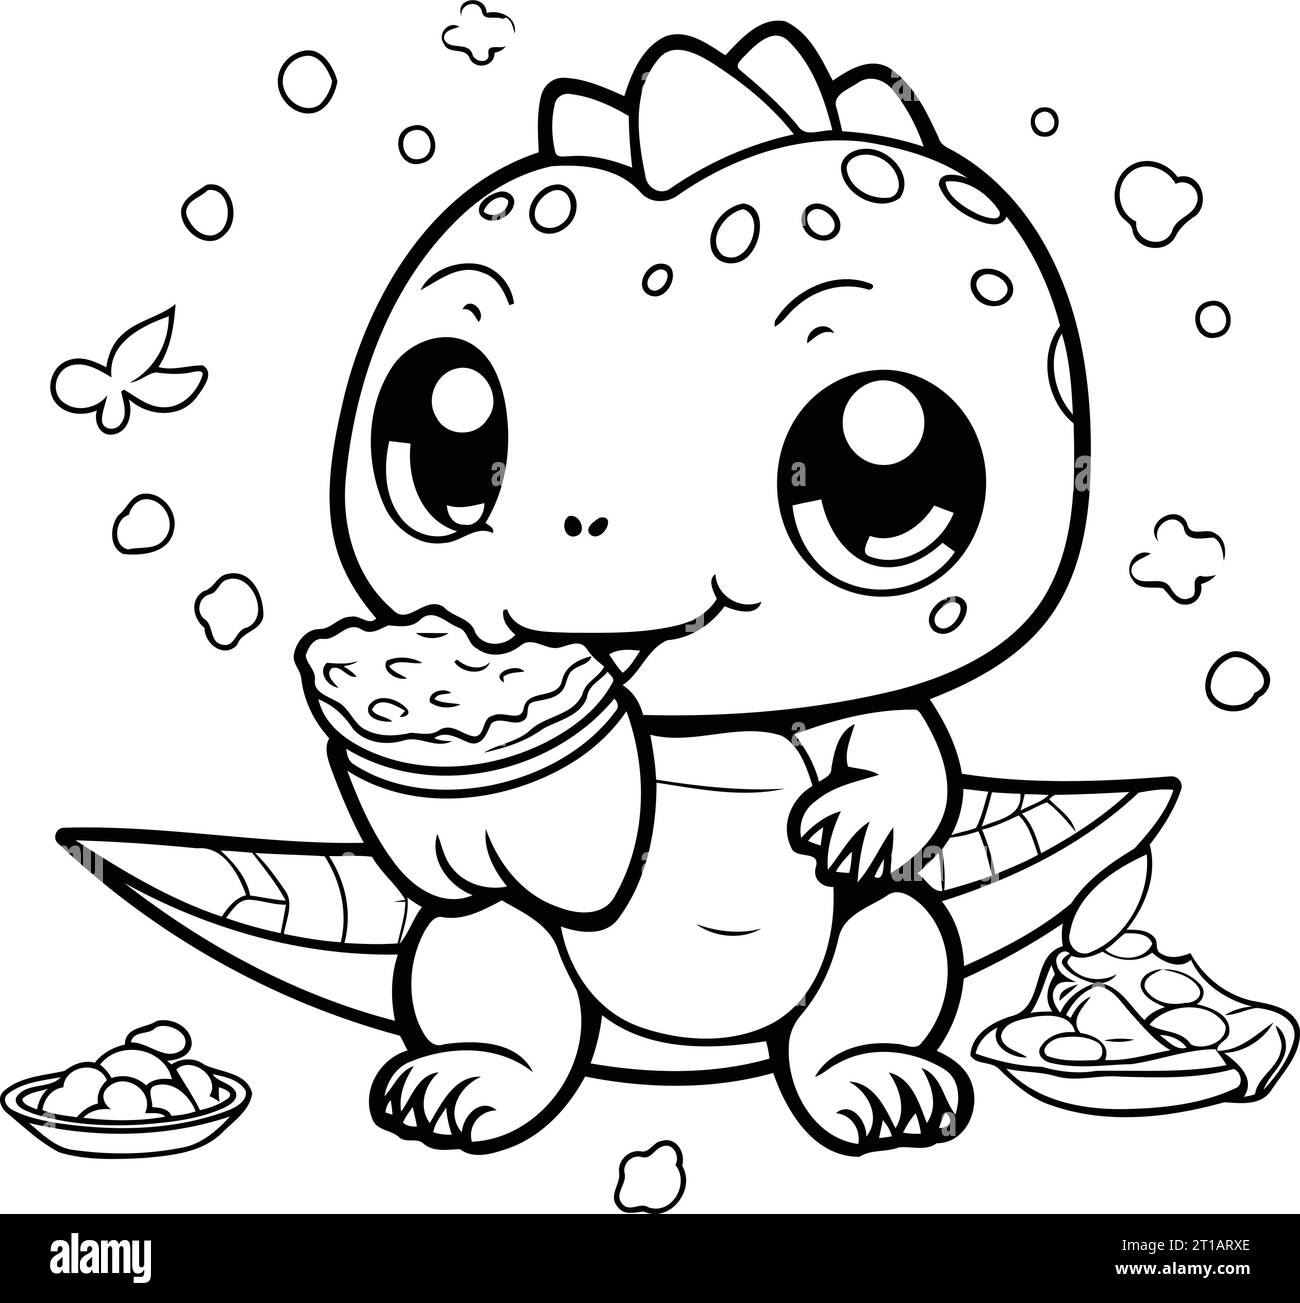 https://c8.alamy.com/comp/2T1ARXE/vector-illustration-of-a-cute-little-dinosaur-eating-rice-coloring-book-for-children-2T1ARXE.jpg